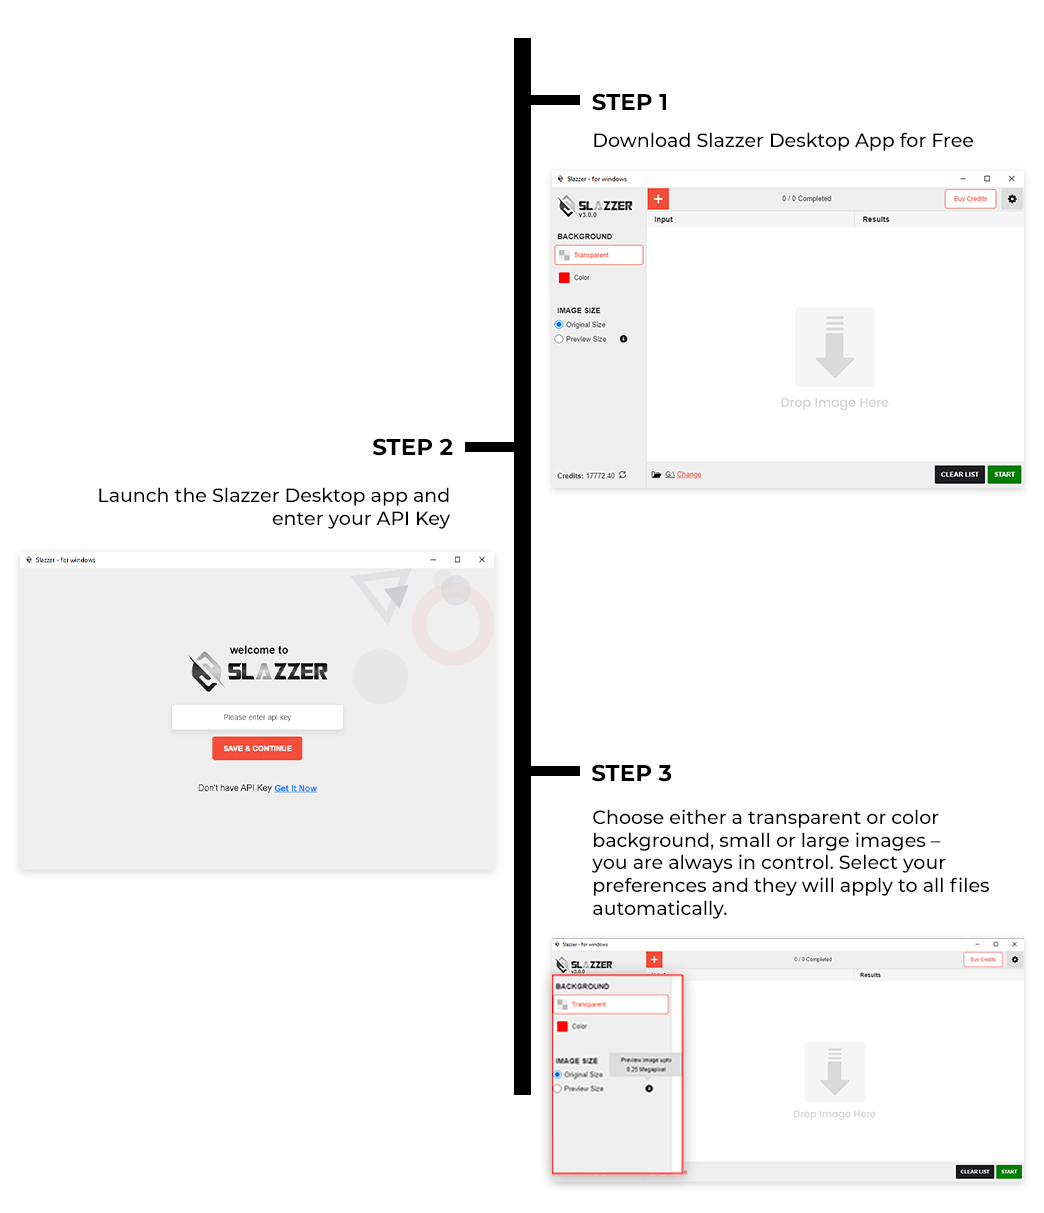 step by step guide to use the slazzer desktop app.